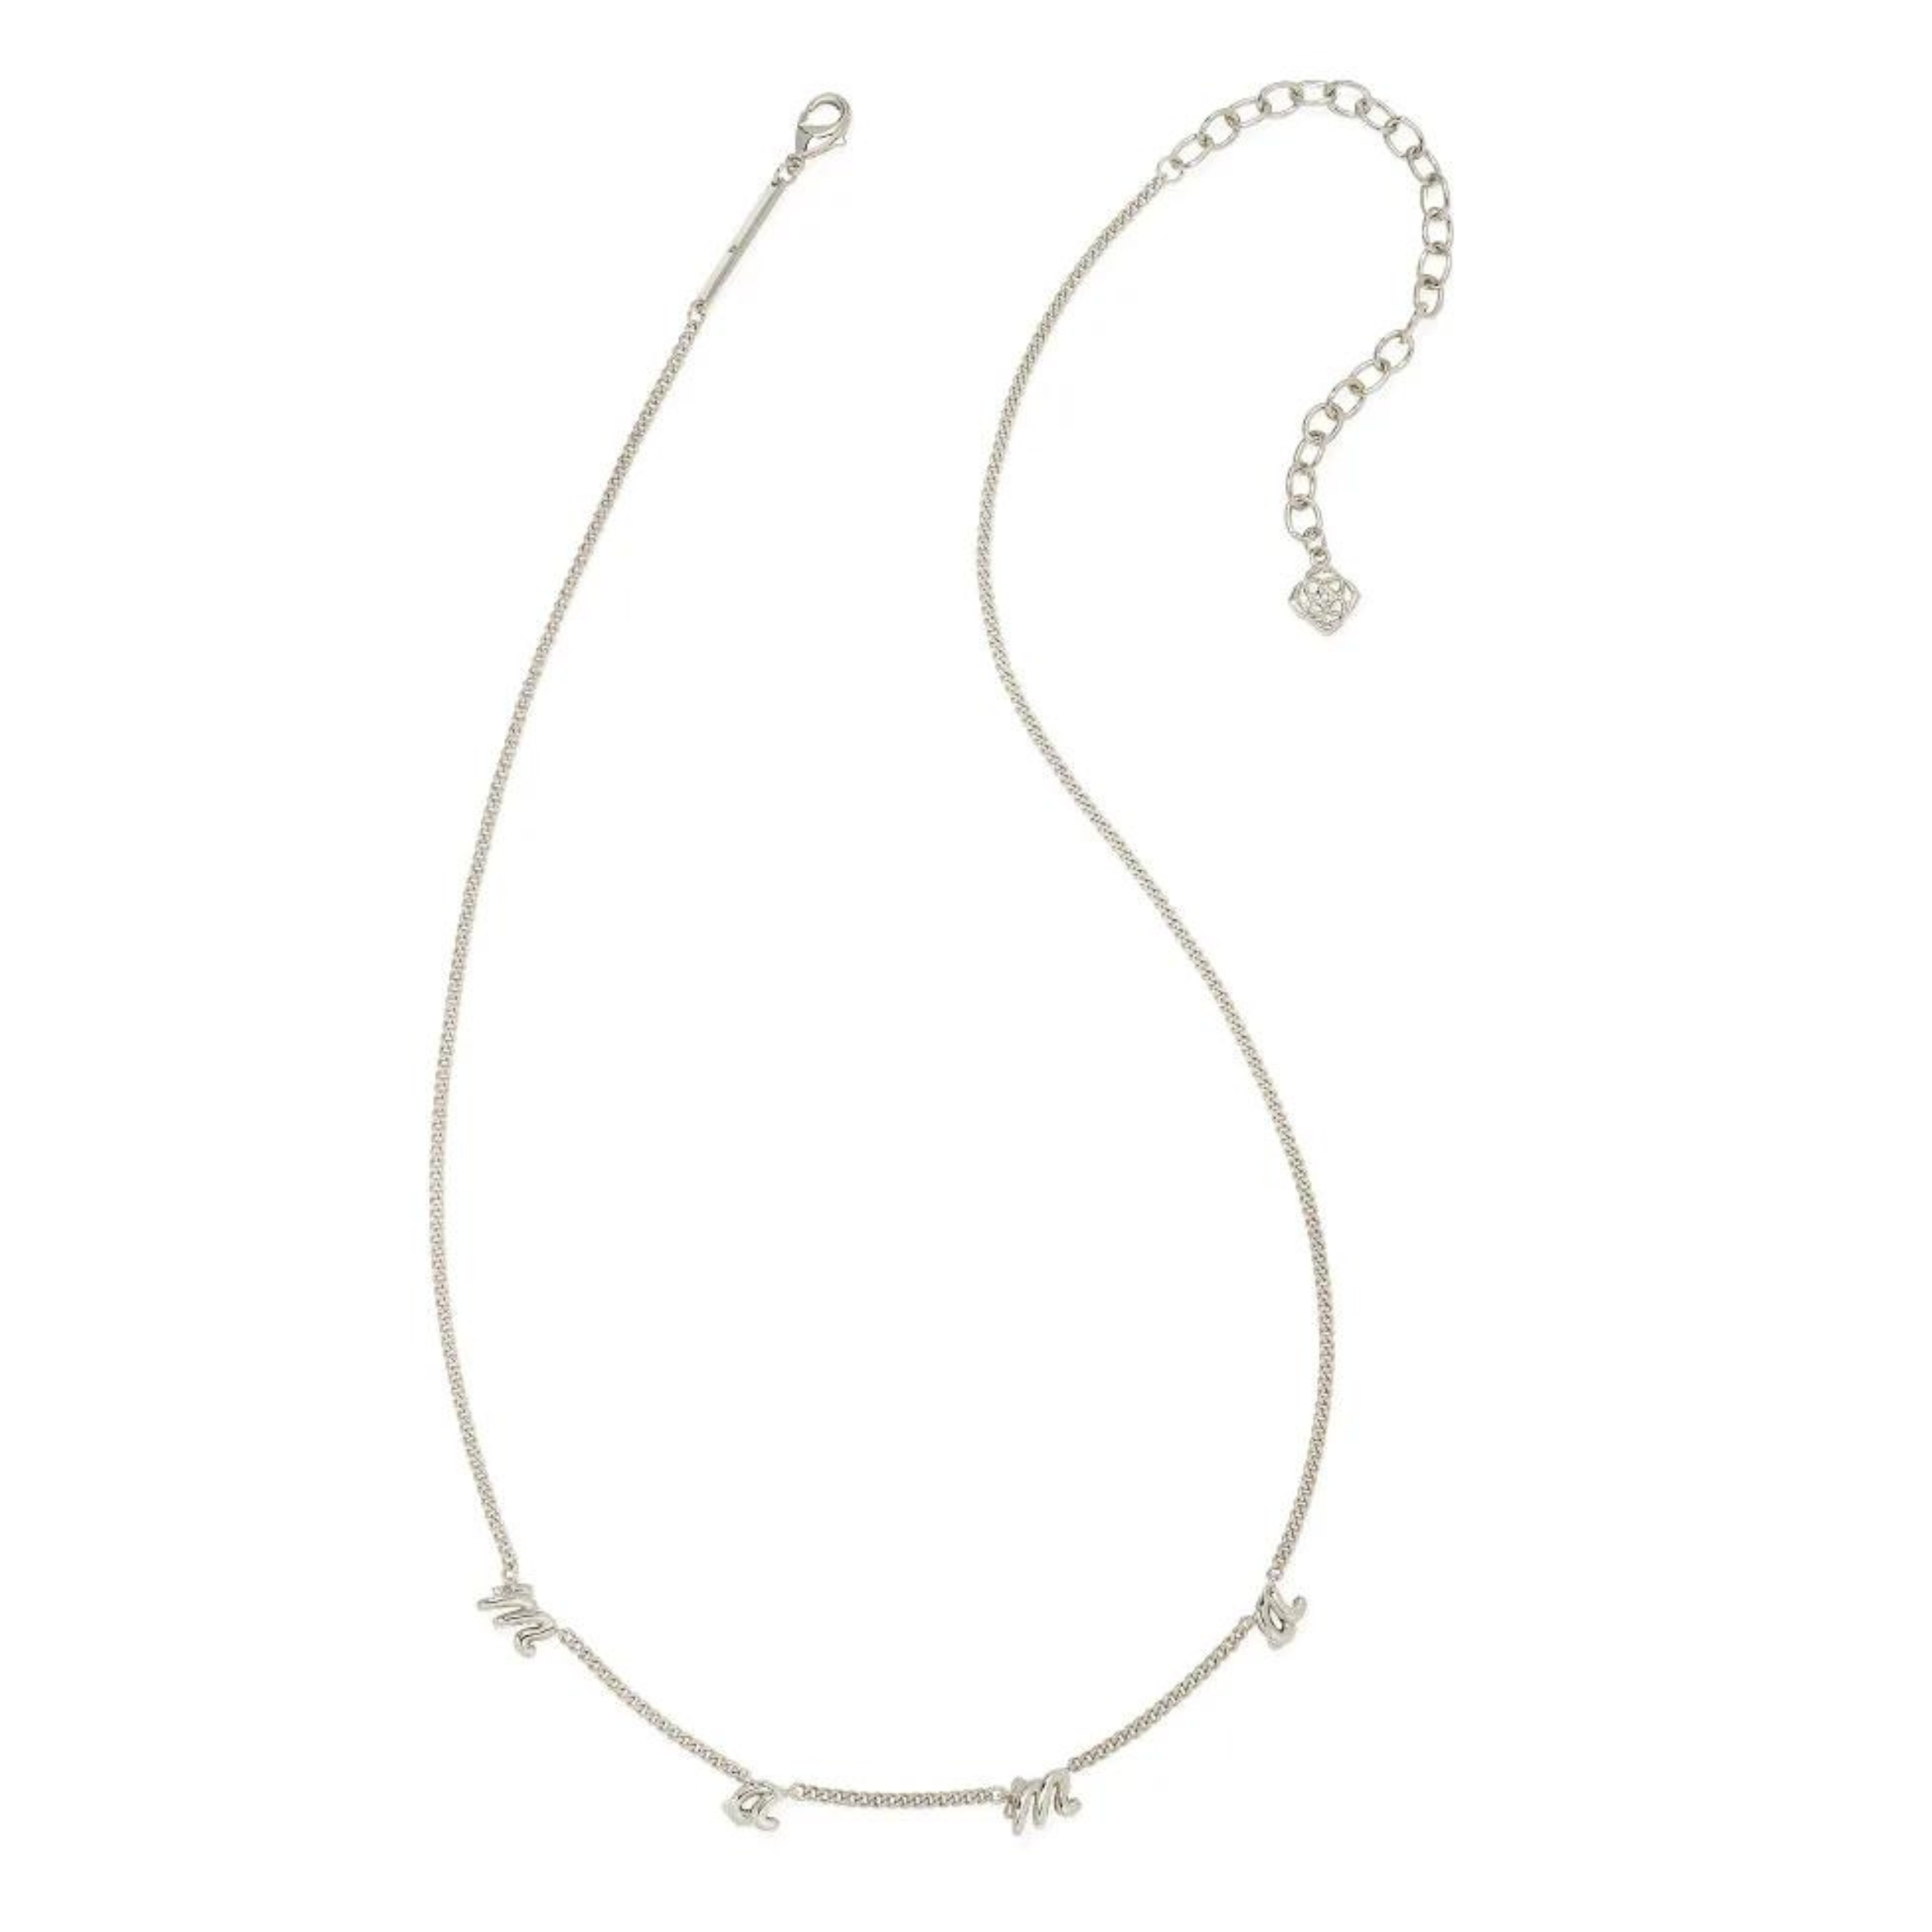 Kendra Scott | Mama Script Strand Necklace in Silver - Giddy Up Glamour Boutique